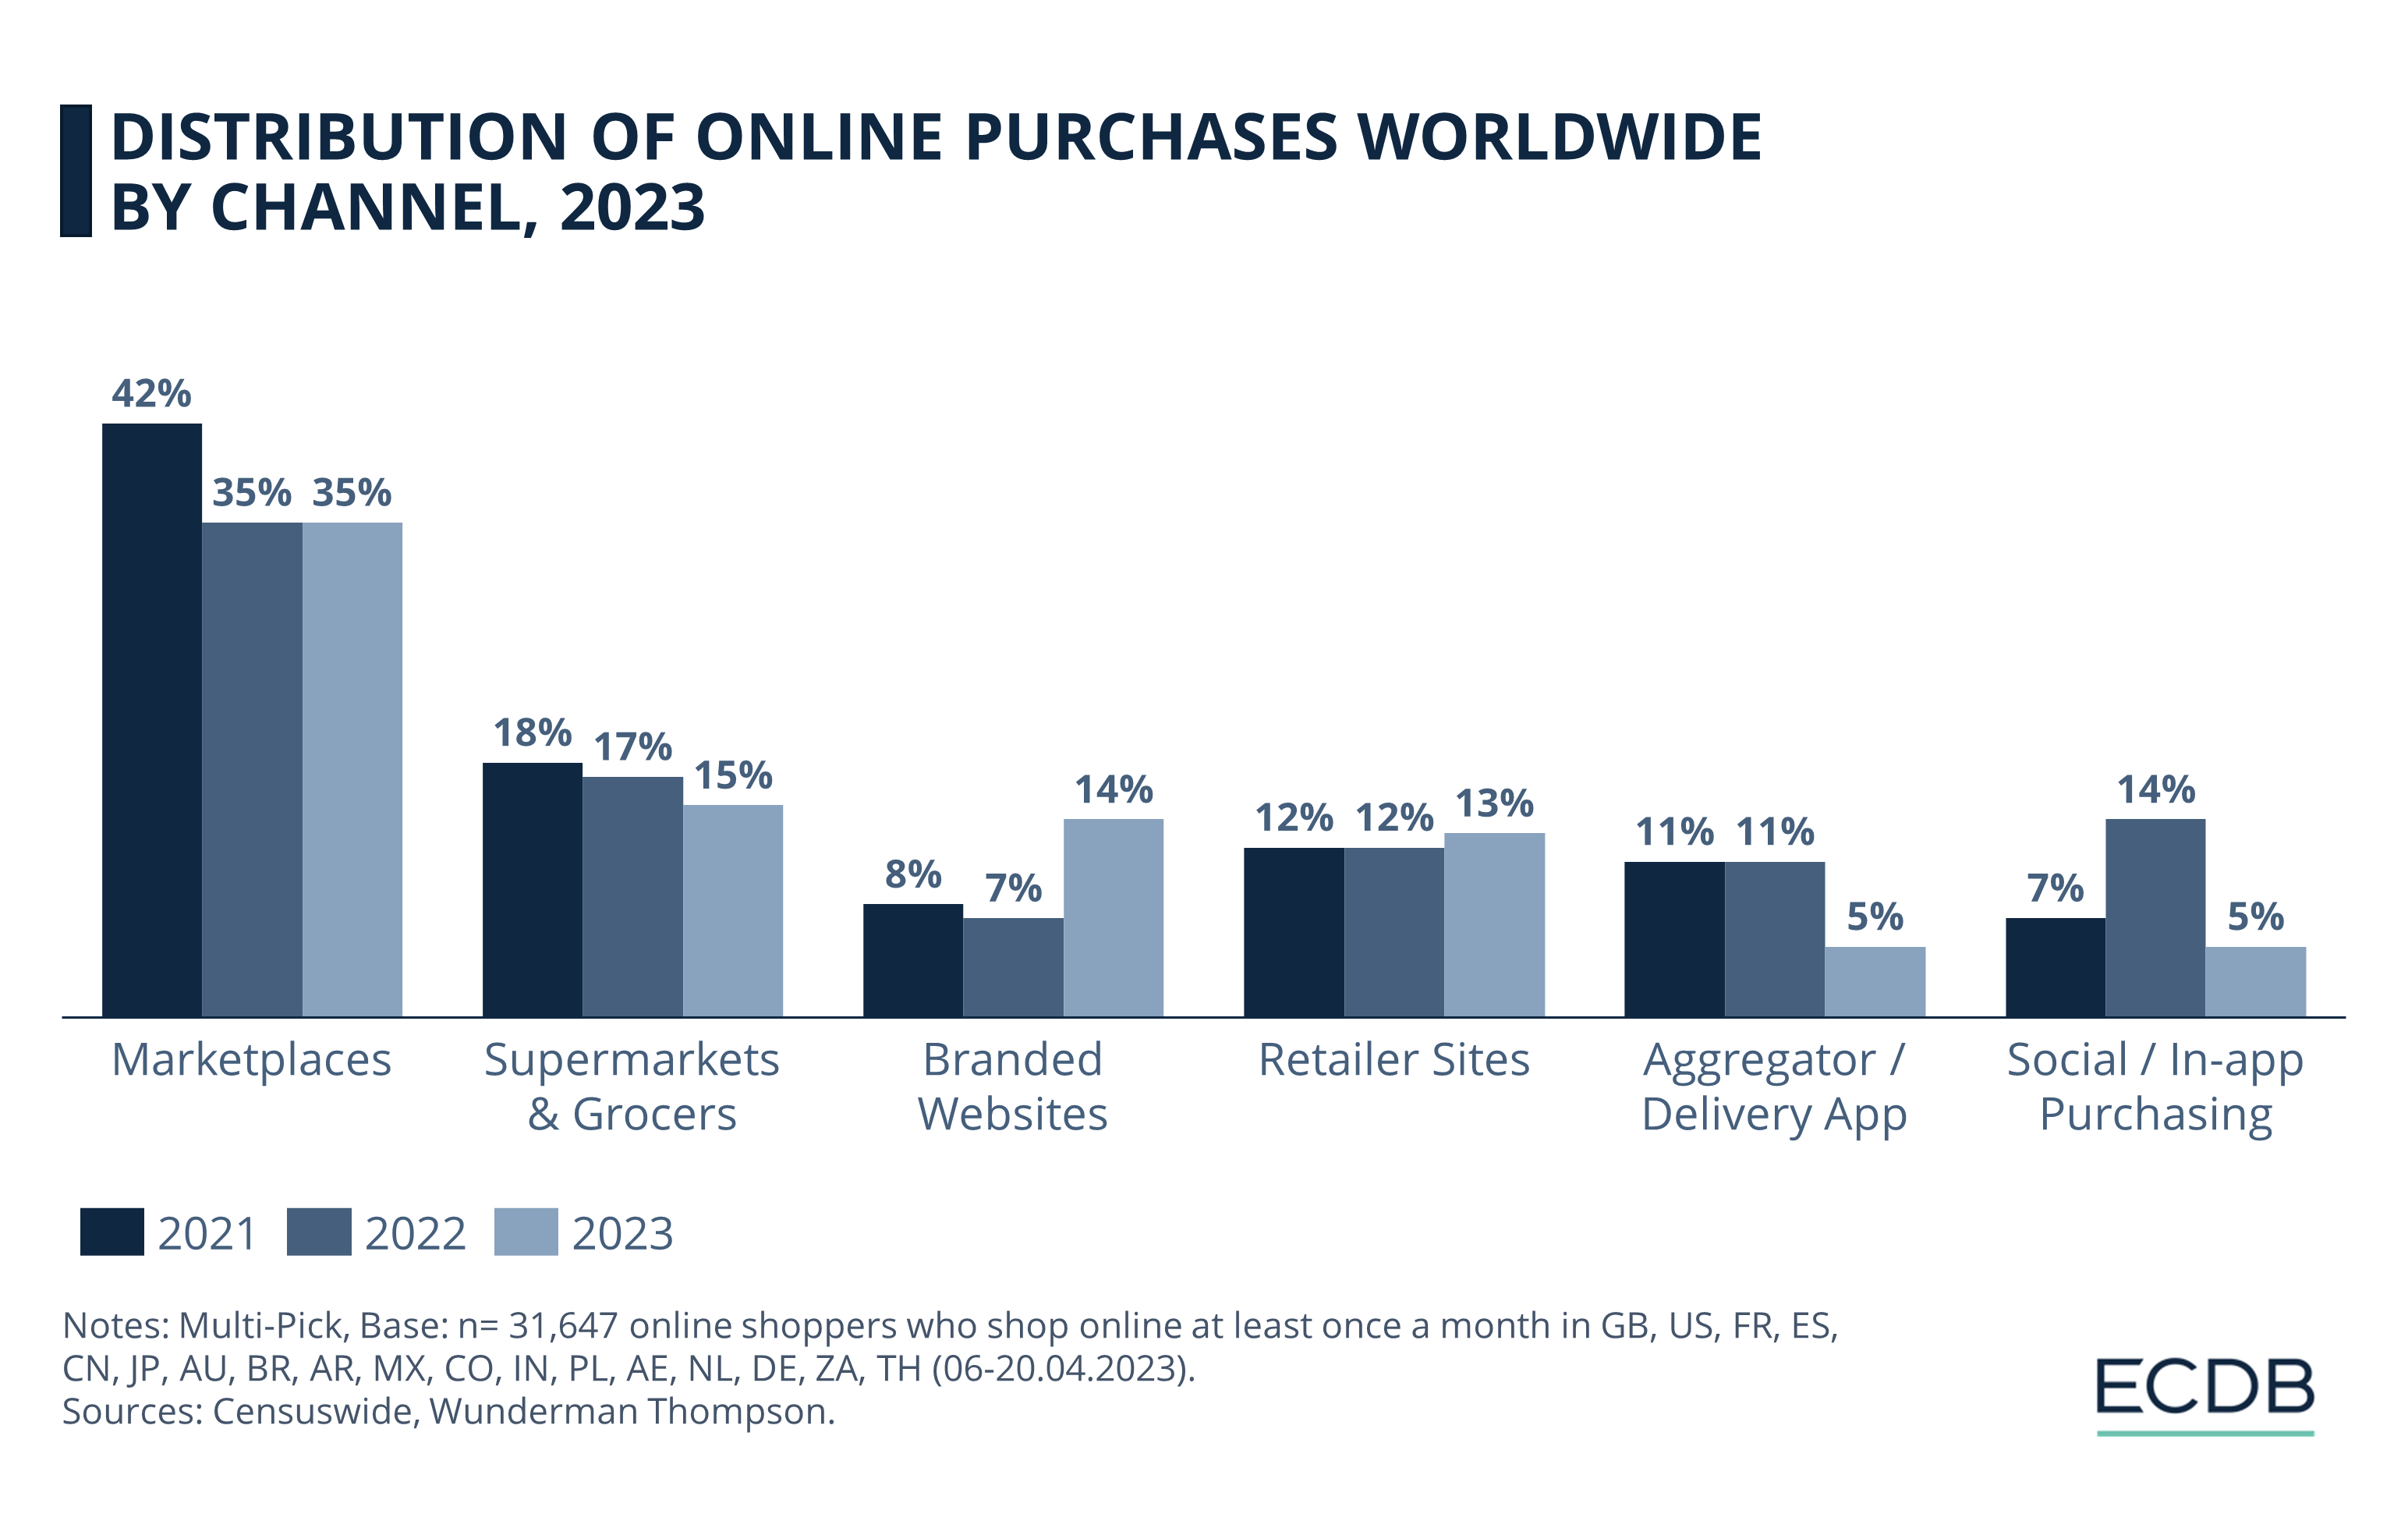 Distribution of Online Purchases Worldwide by Channel, 2023